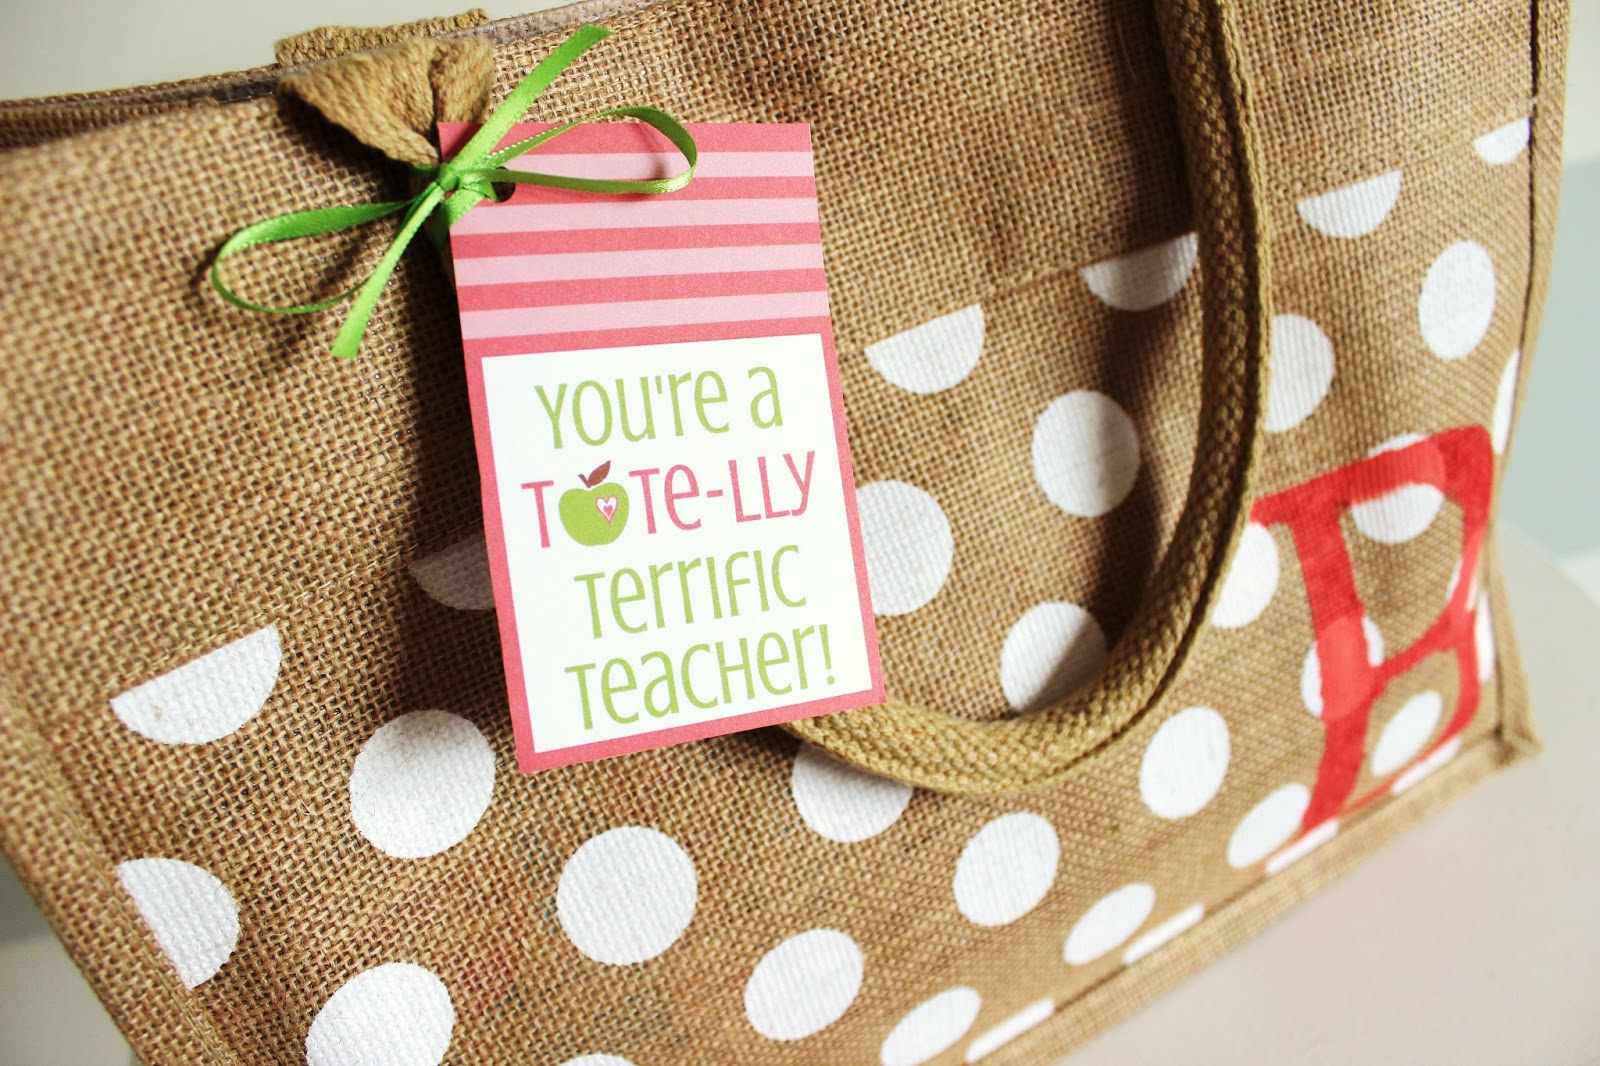 I love the idea of gifting teachers something they can make good use of and...